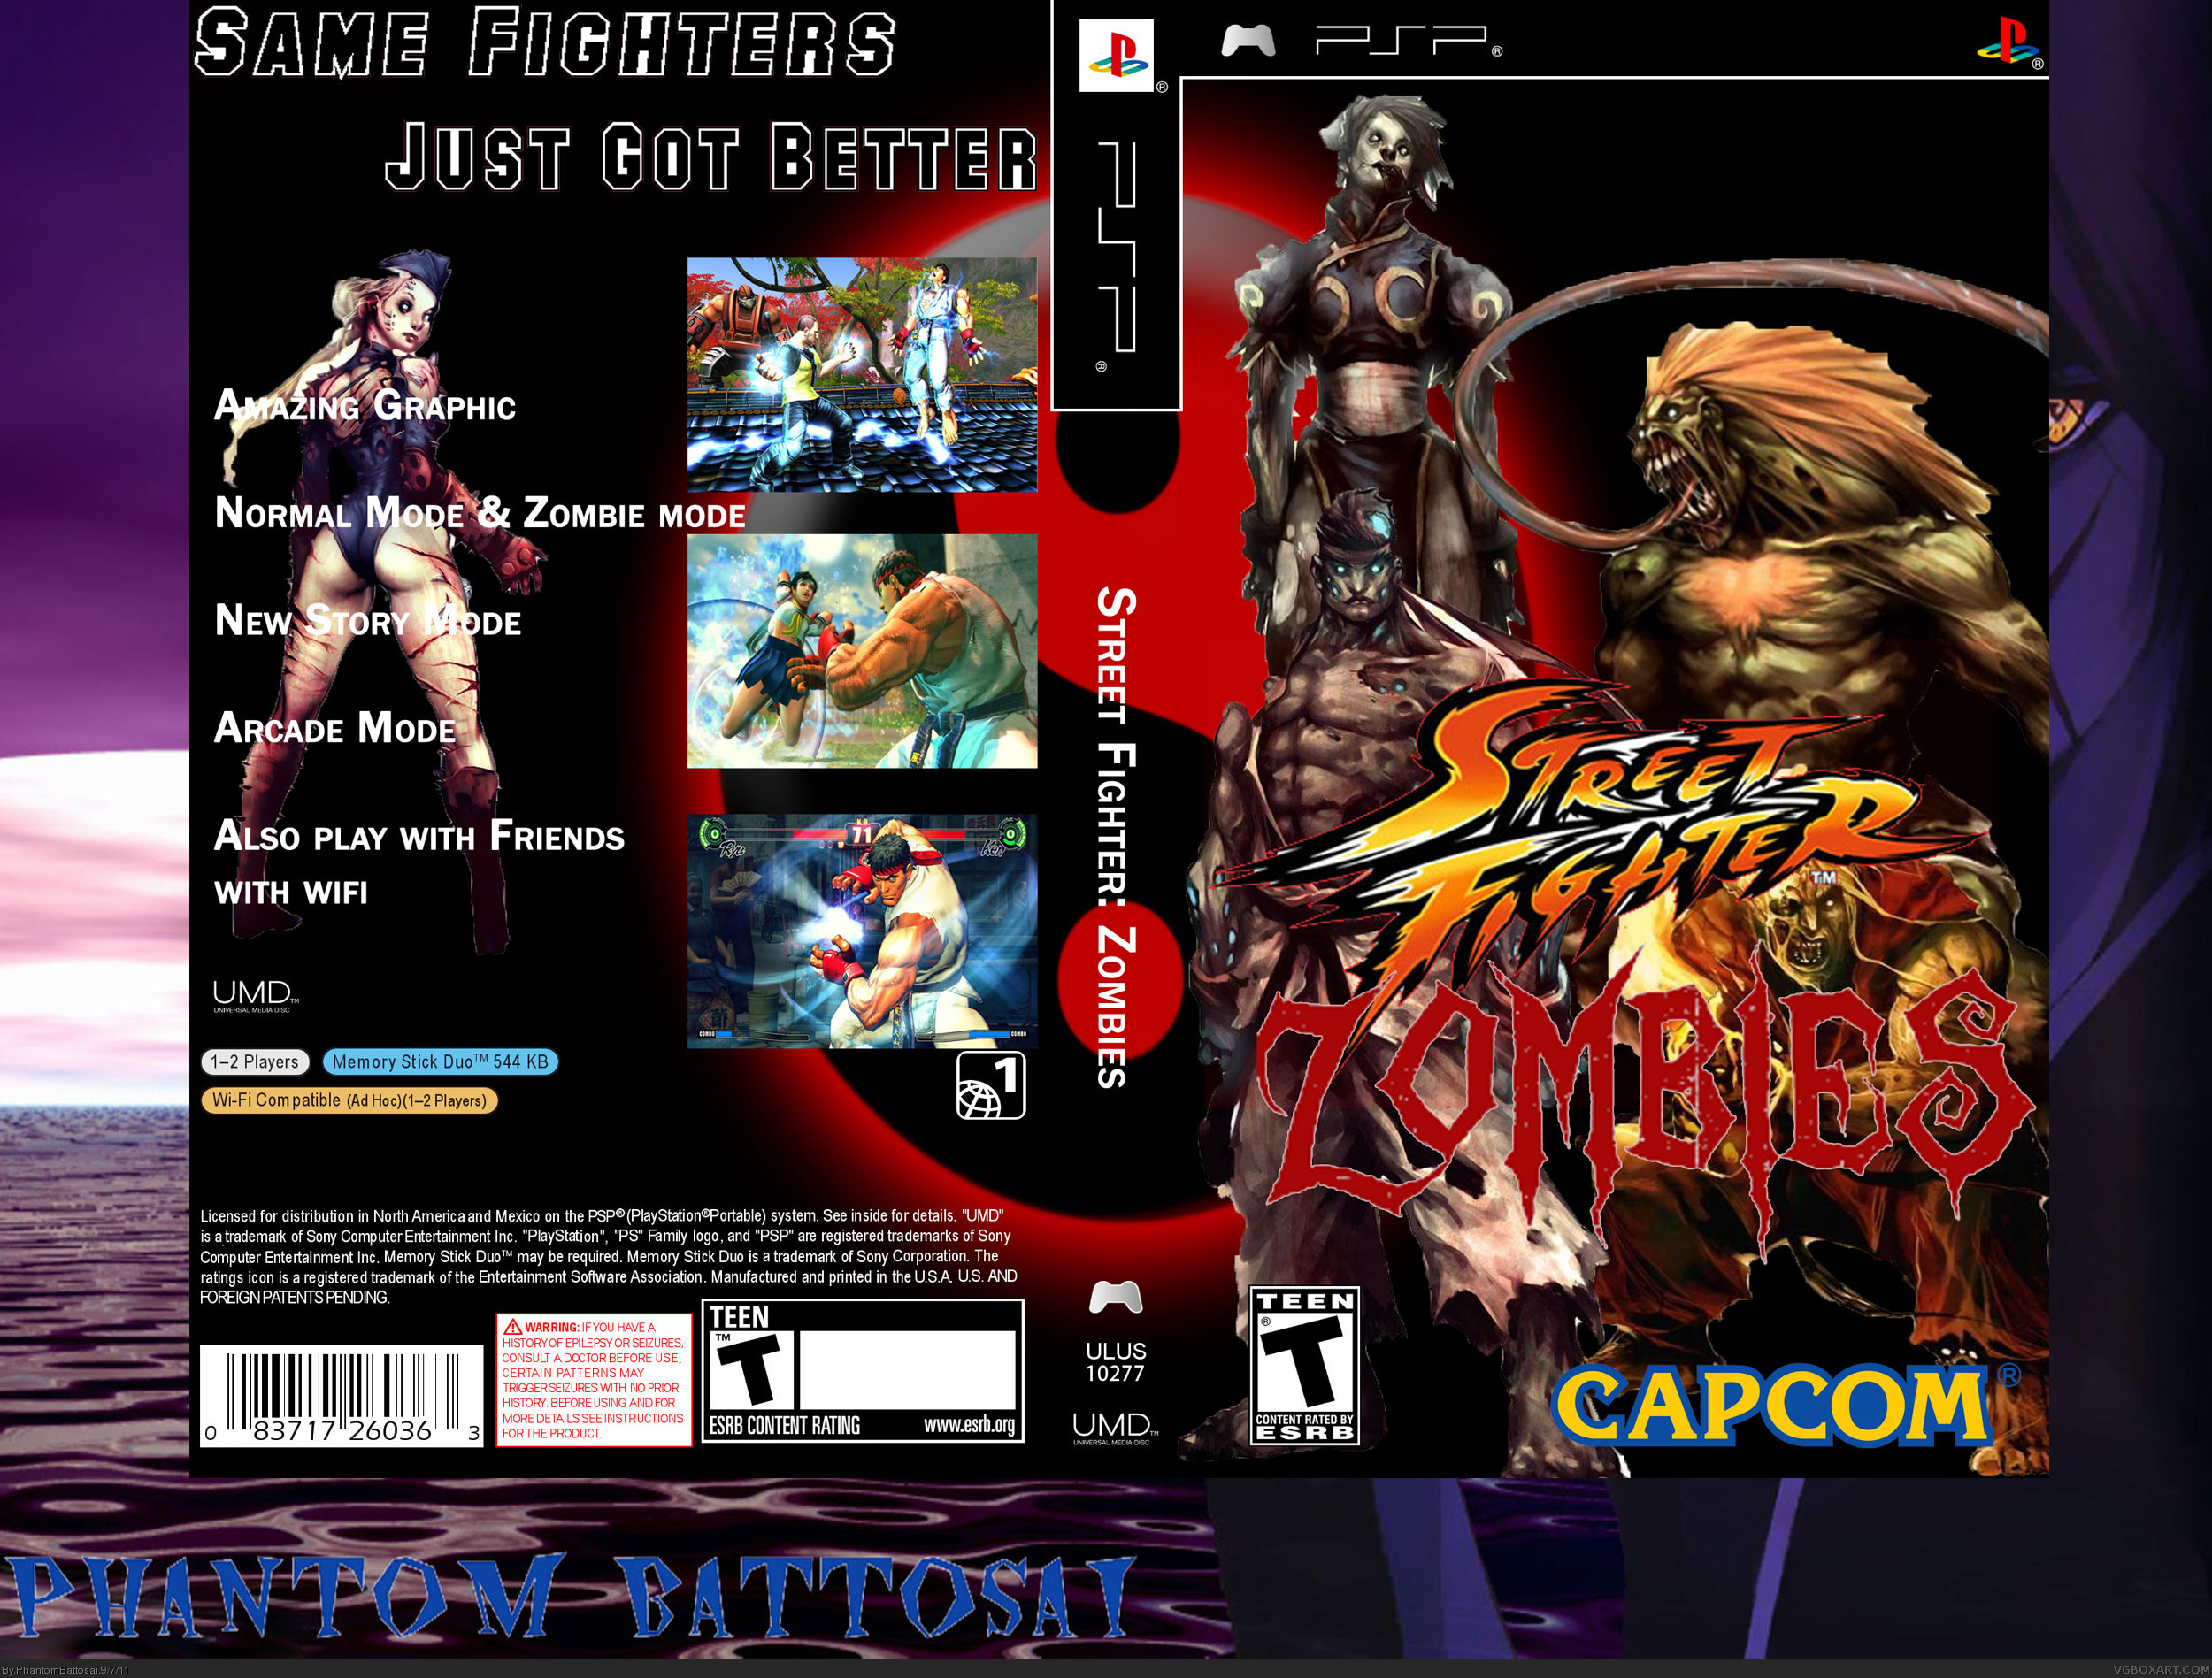 Street Fighter: Zombies box cover